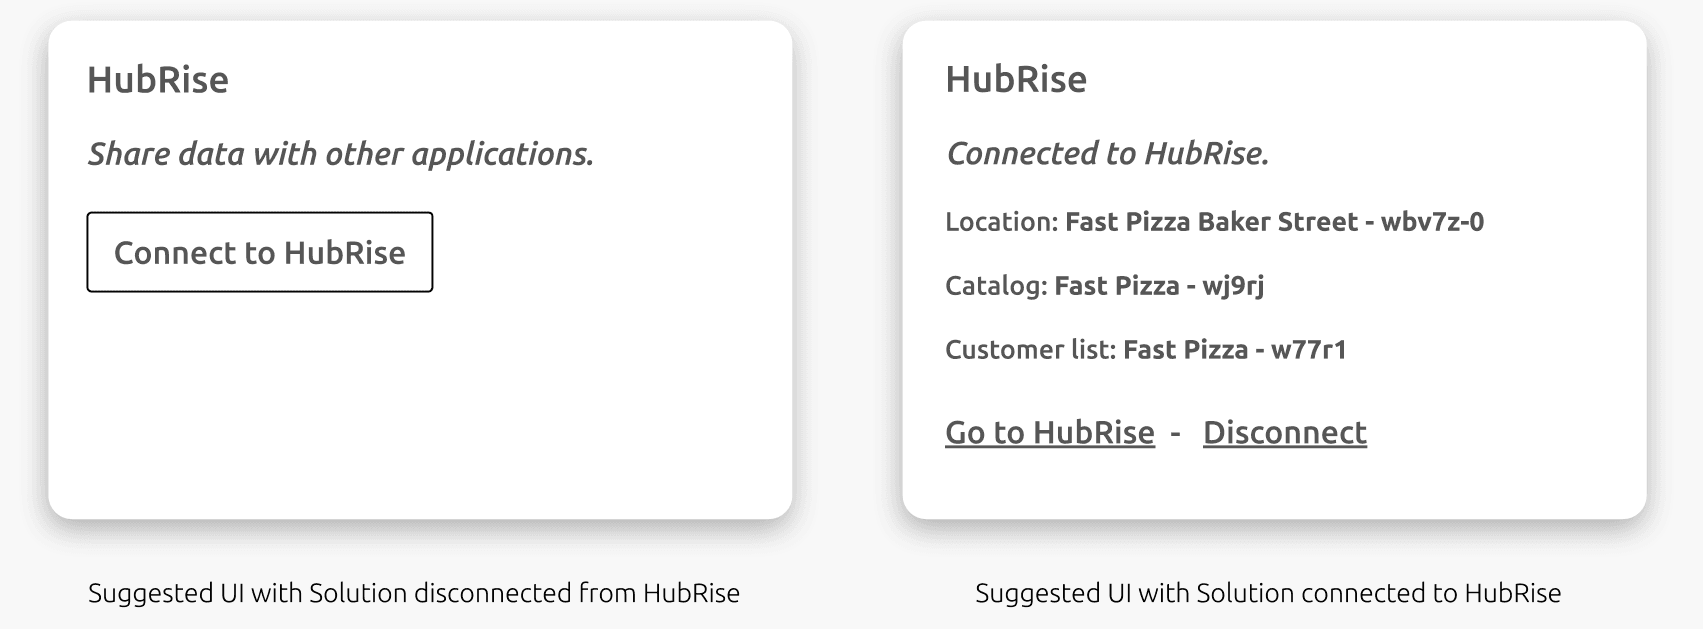 UI wireframes for the back office of a Solution not connected (left) and connected (right) to HubRise